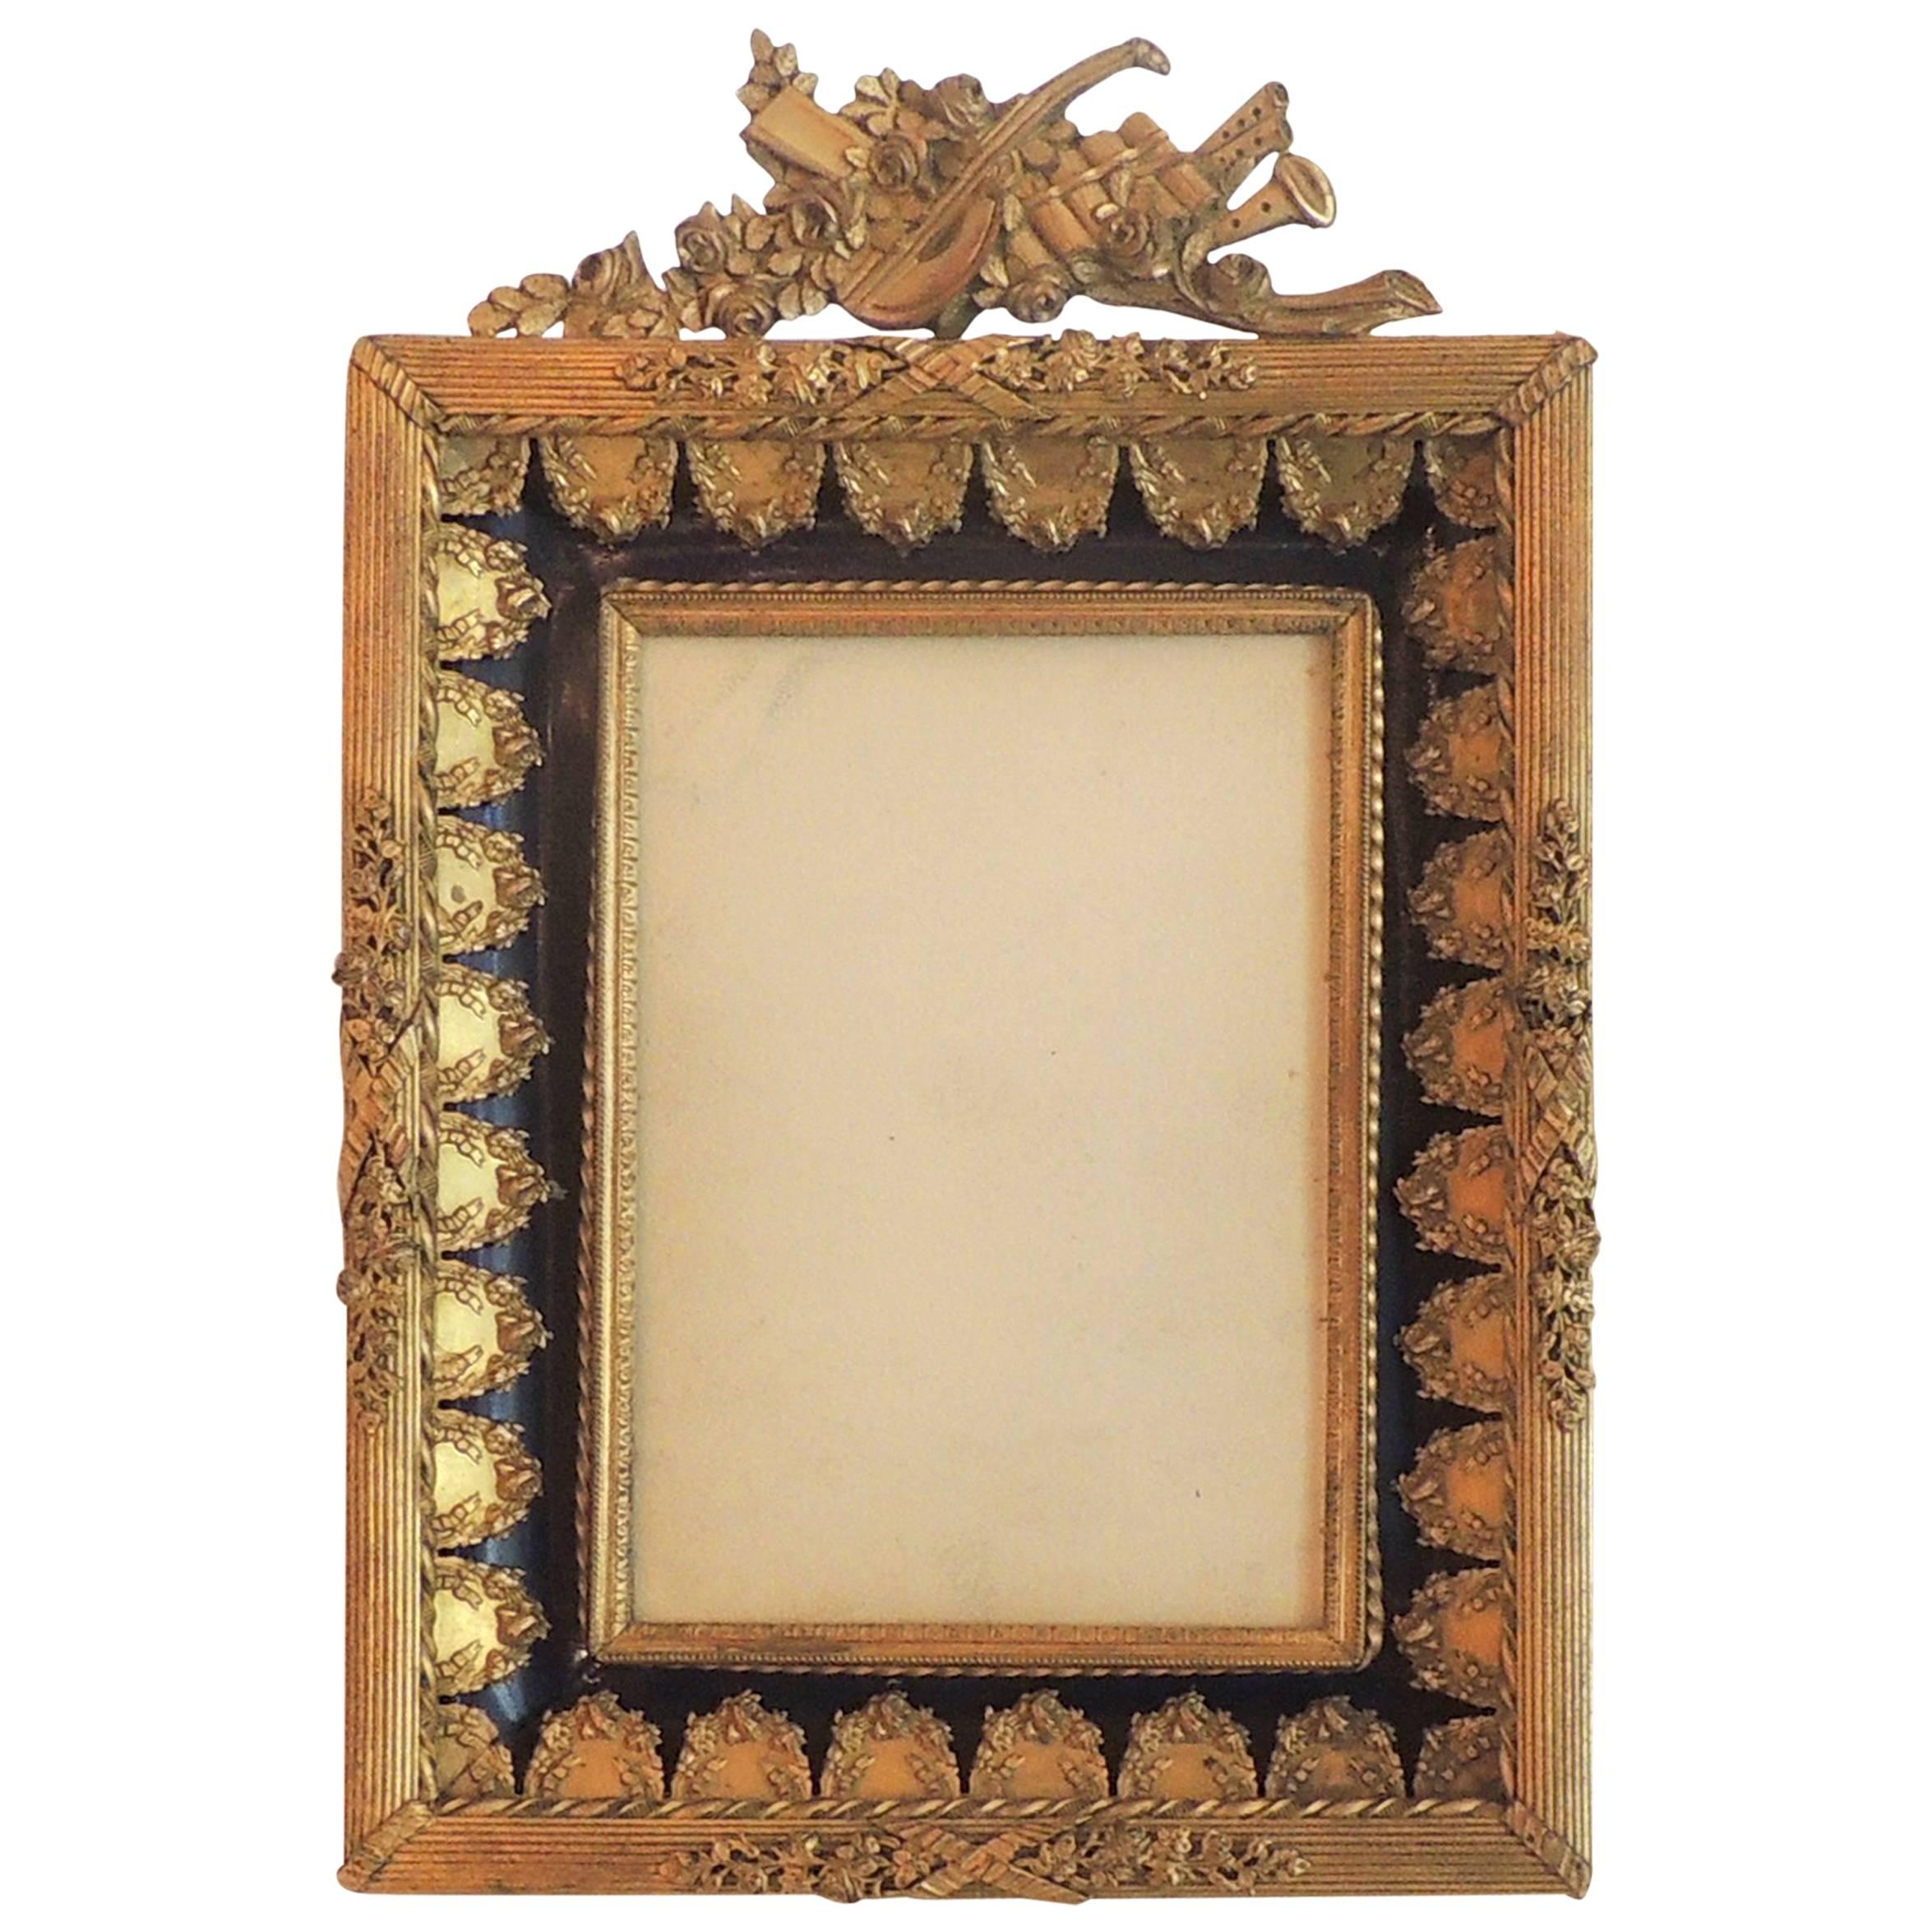 Wonderful French Doré Bronze Blue Enamel Neoclassical Musical Picture Frame